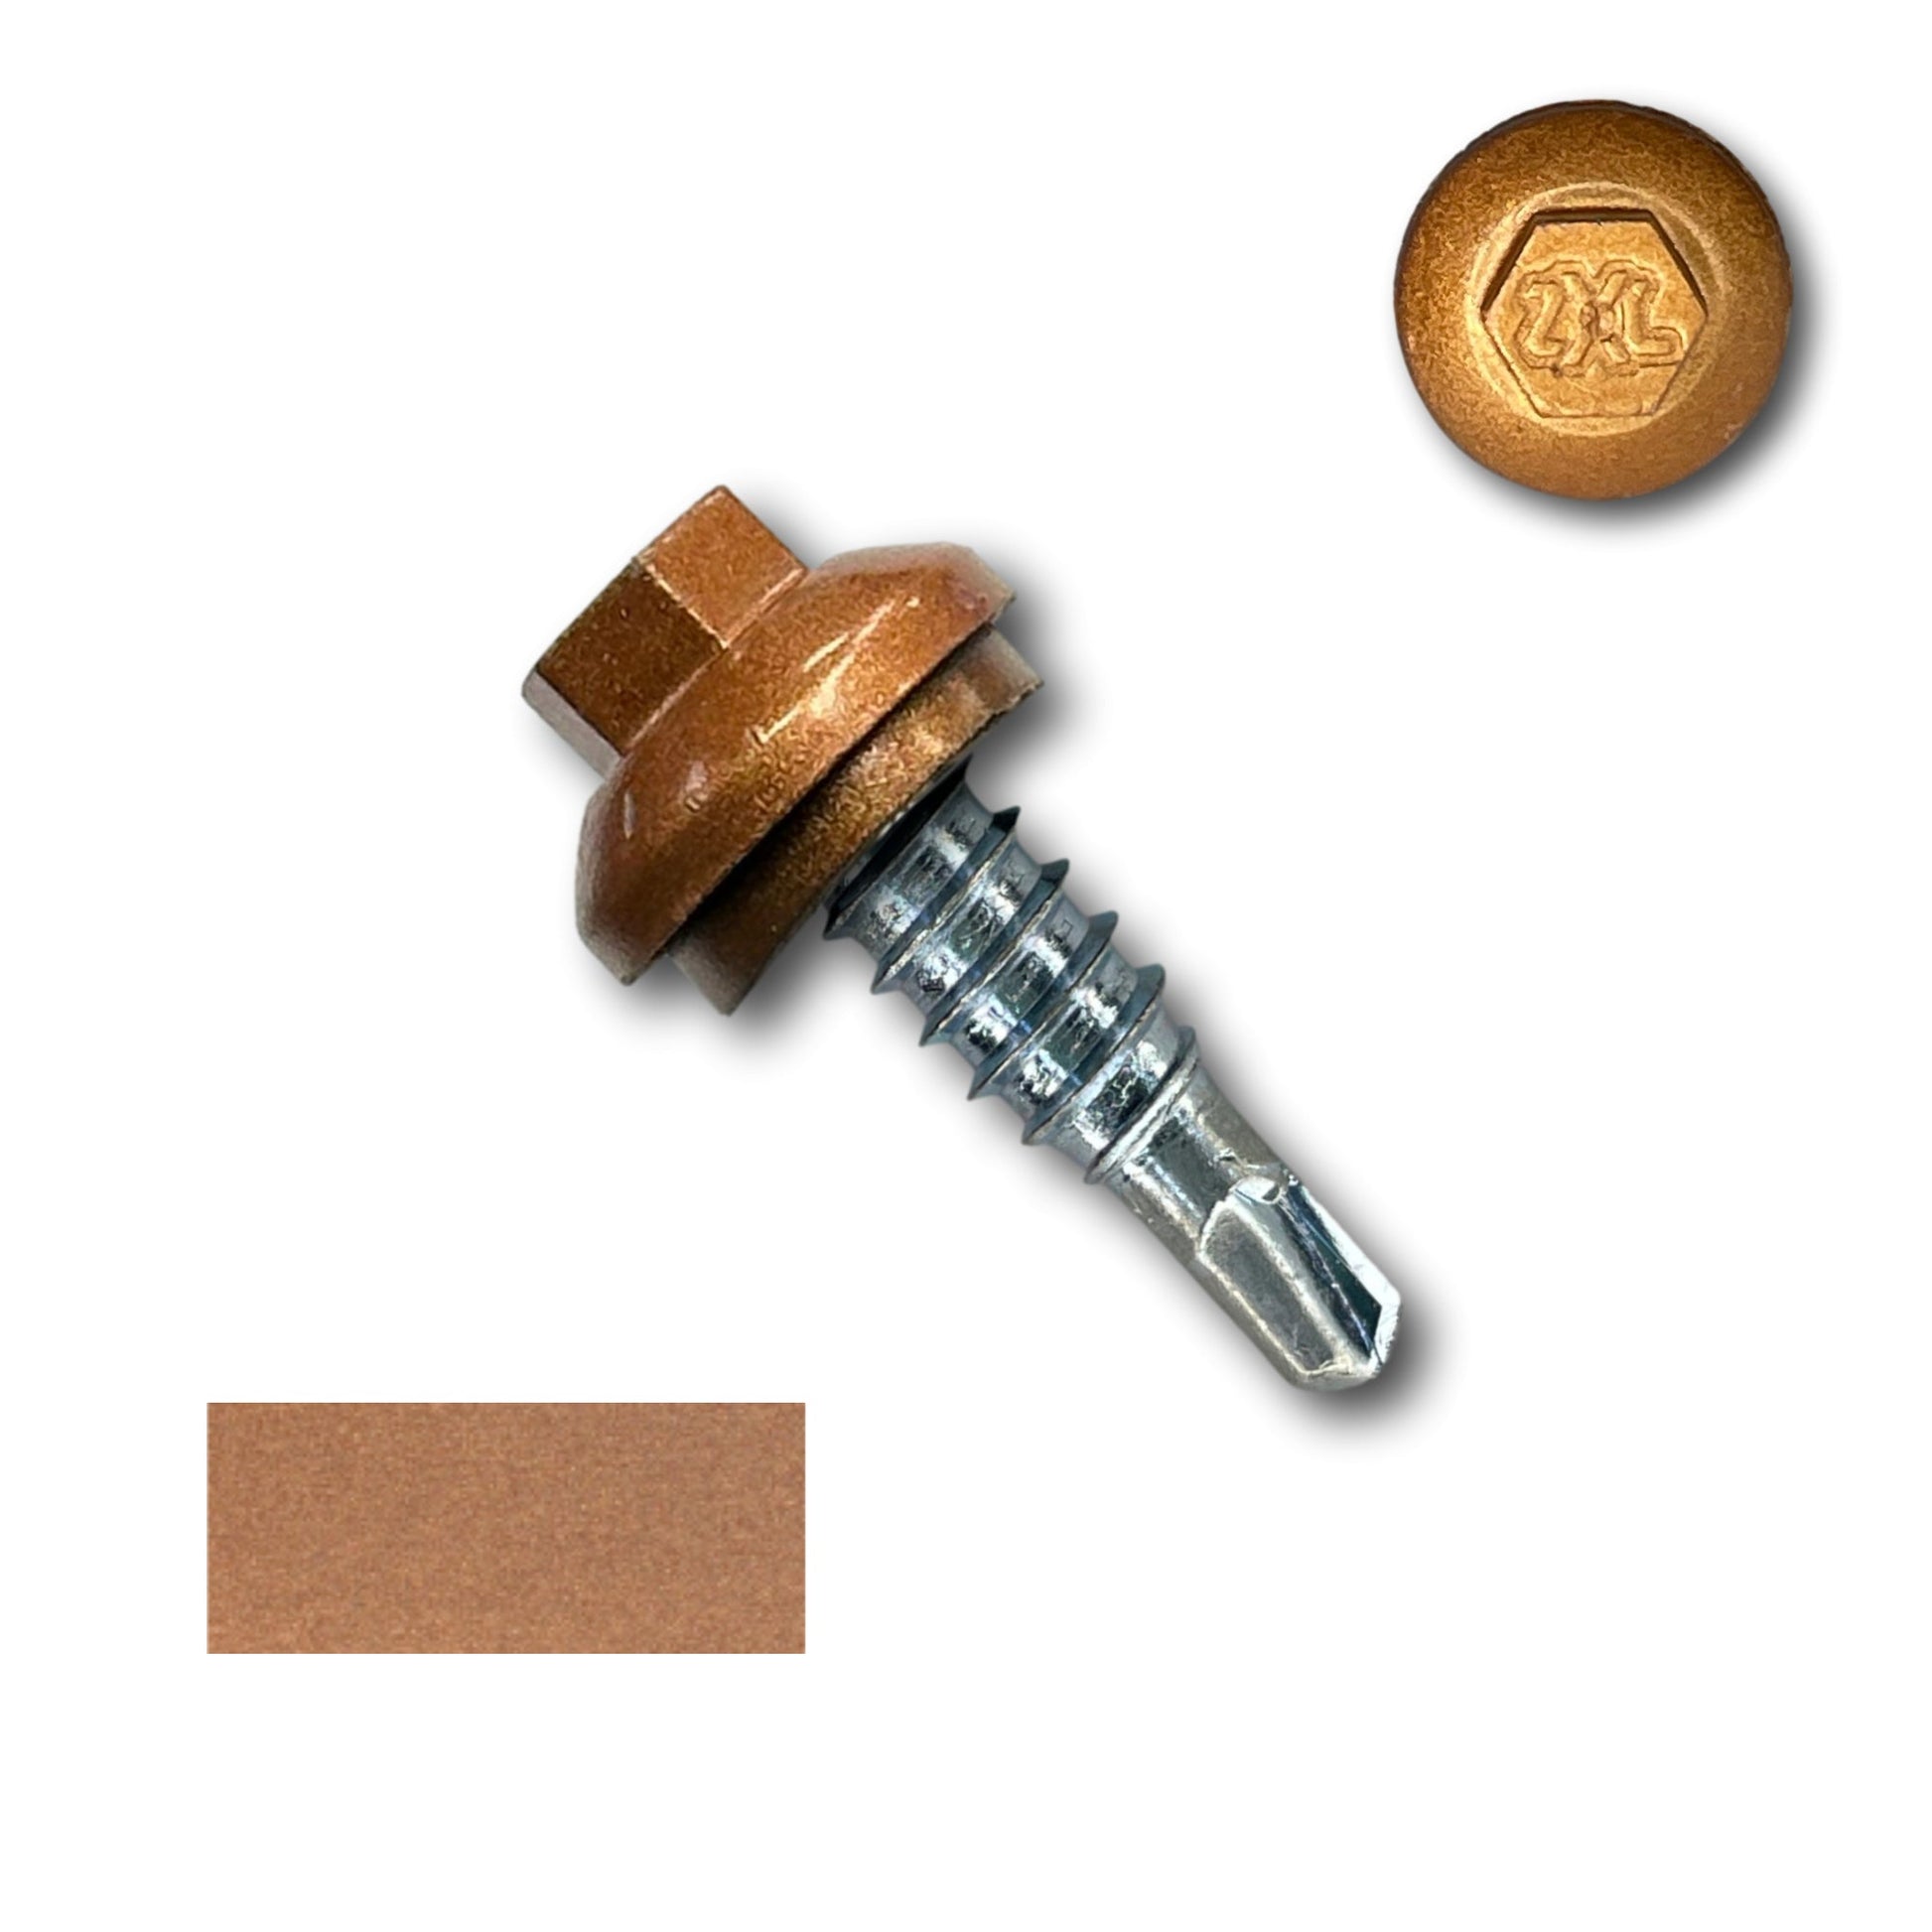 A #14 x 7/8" Stitch Lap ZXL Dome Cap Metal Building Screw, Self-Drilling - 250 Pack by Perma Cover with a bronze-colored hexagonal head is shown. A close-up of the top of the screw head and a rectangle of the same bronze color are also displayed next to it, ensuring secure fastening.